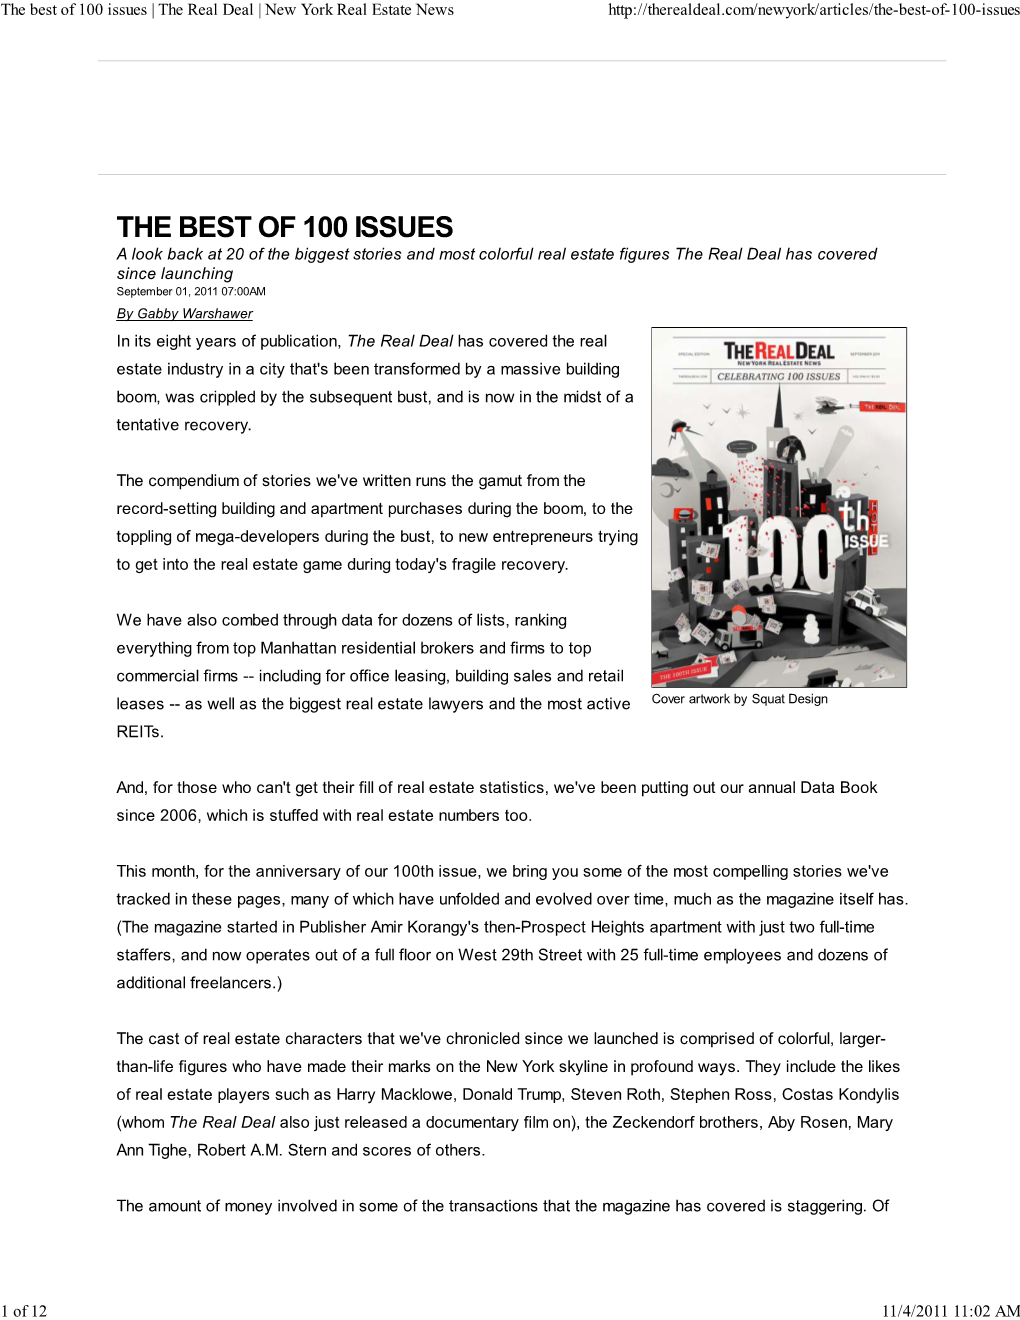 The Best of 100 Issues | the Real Deal | New York Real Estate News